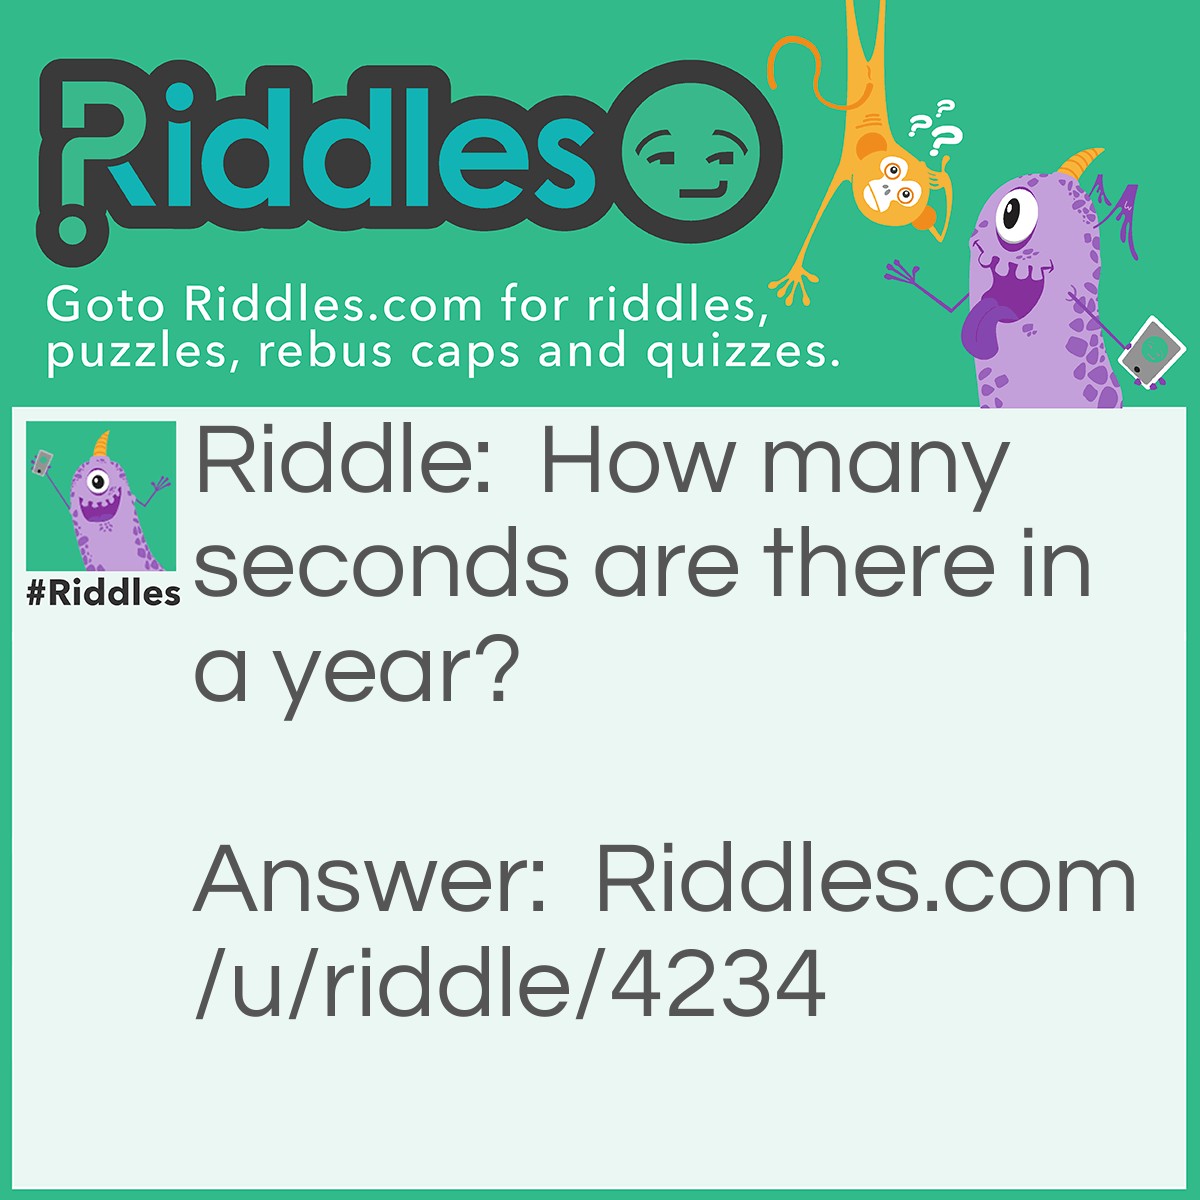 Riddle: How many seconds are there in a year? Answer: 24.(jan2nd, 22nd…)